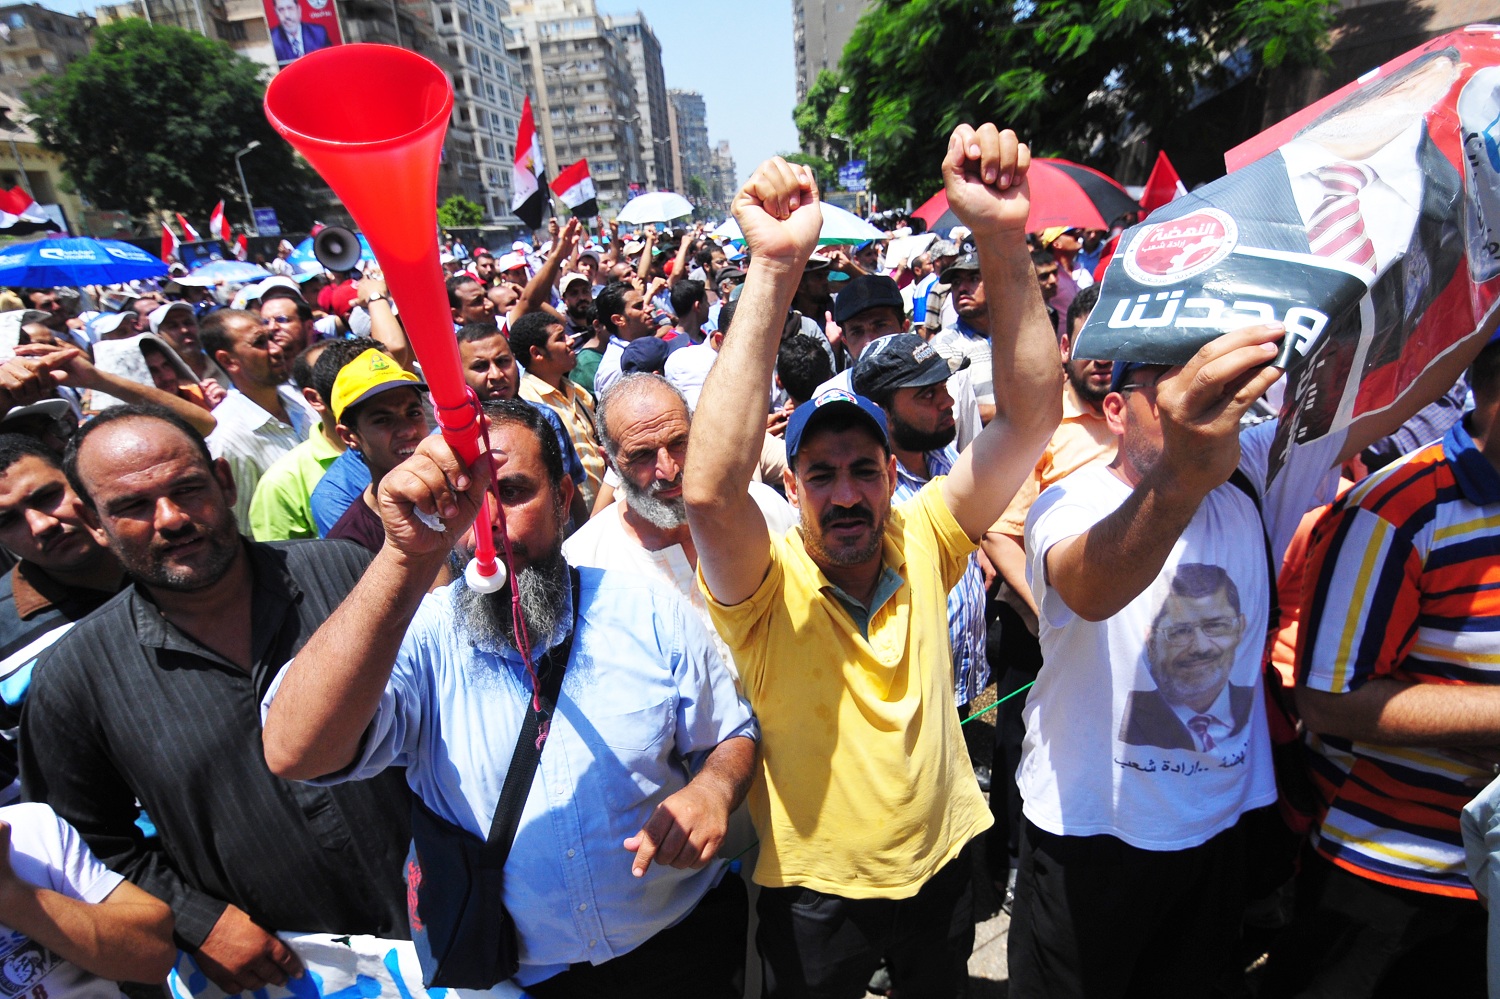 President Morsy's supporters outside the State Council building